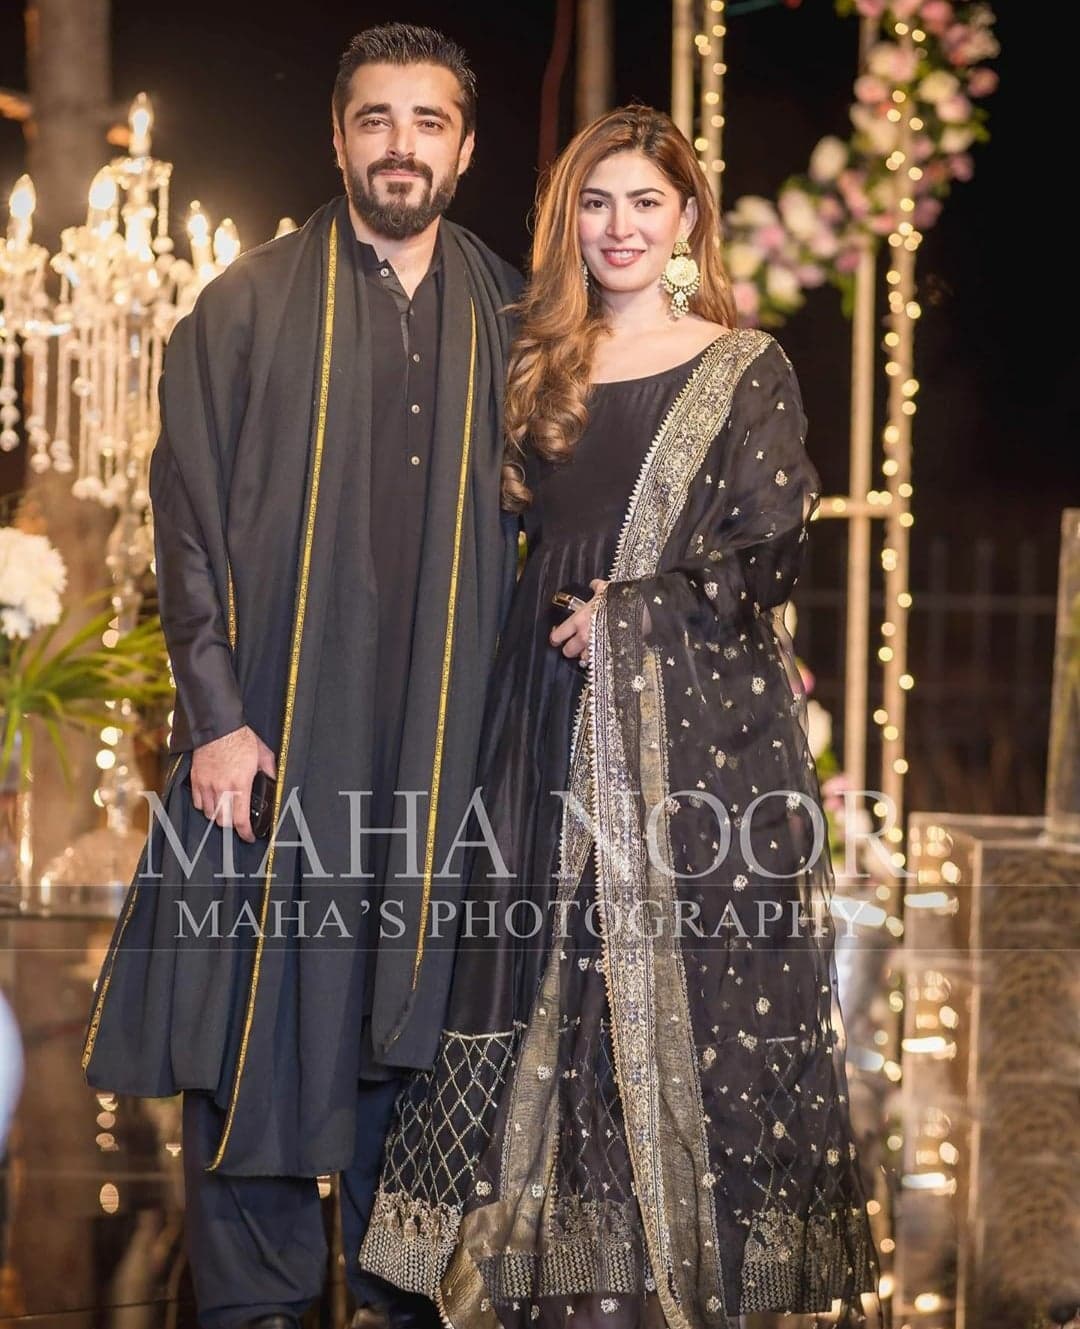 Top 10 Matching Outfits Worn By Pakistani Celebrity Couples